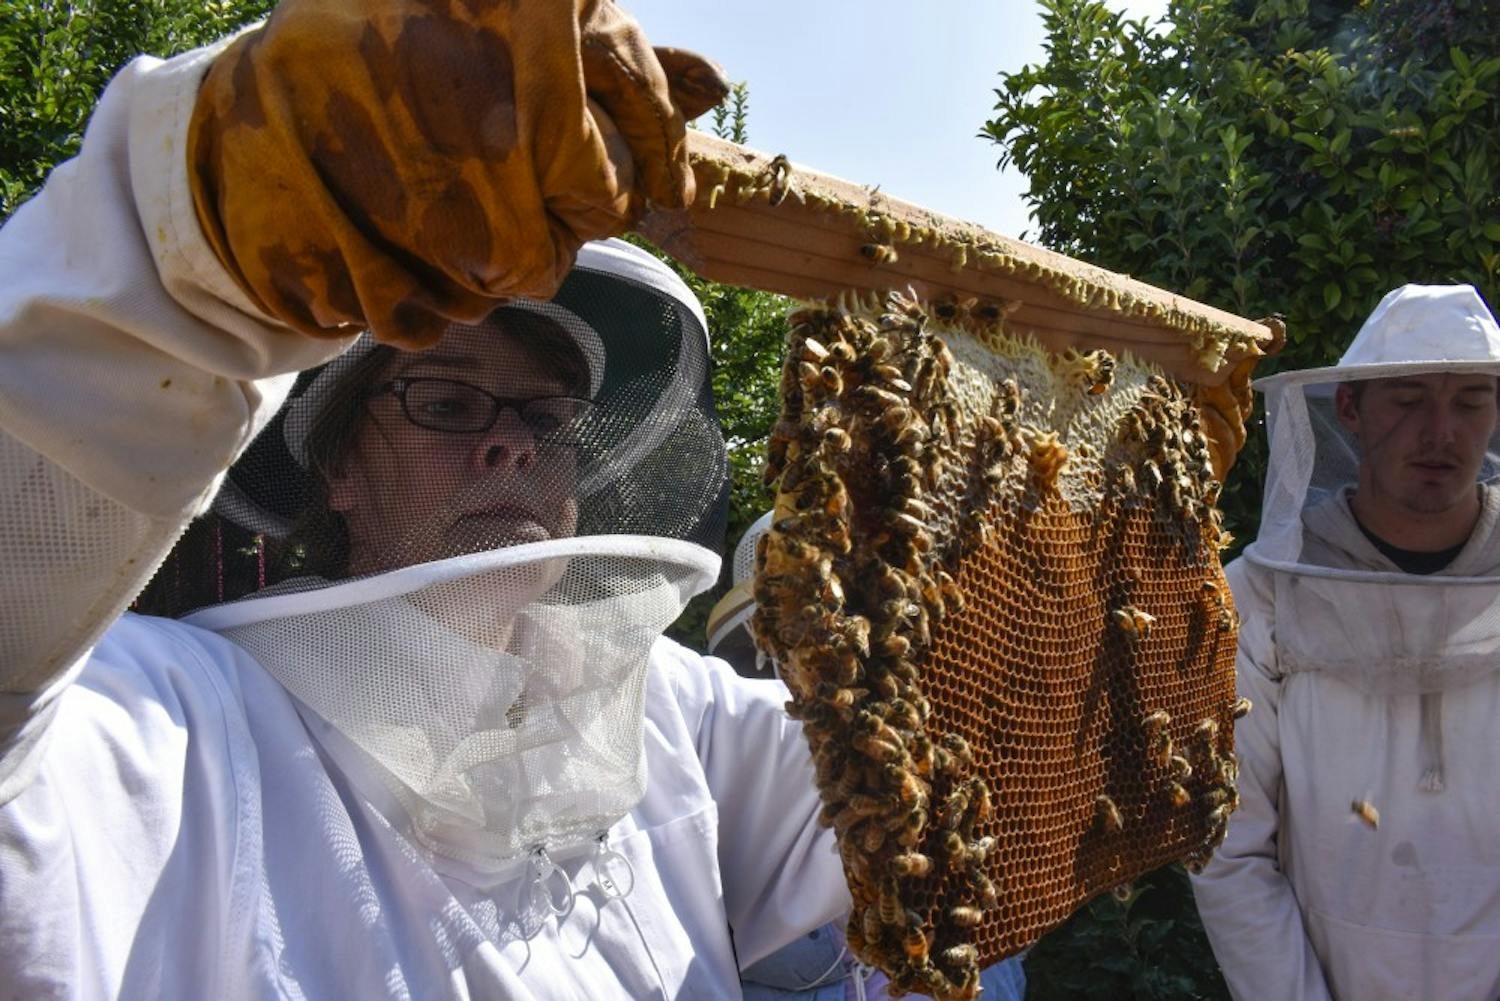 Sarah Davies, left, inspects a honeycomb from one of her hives on Sunday, Aug. 19, 2018.